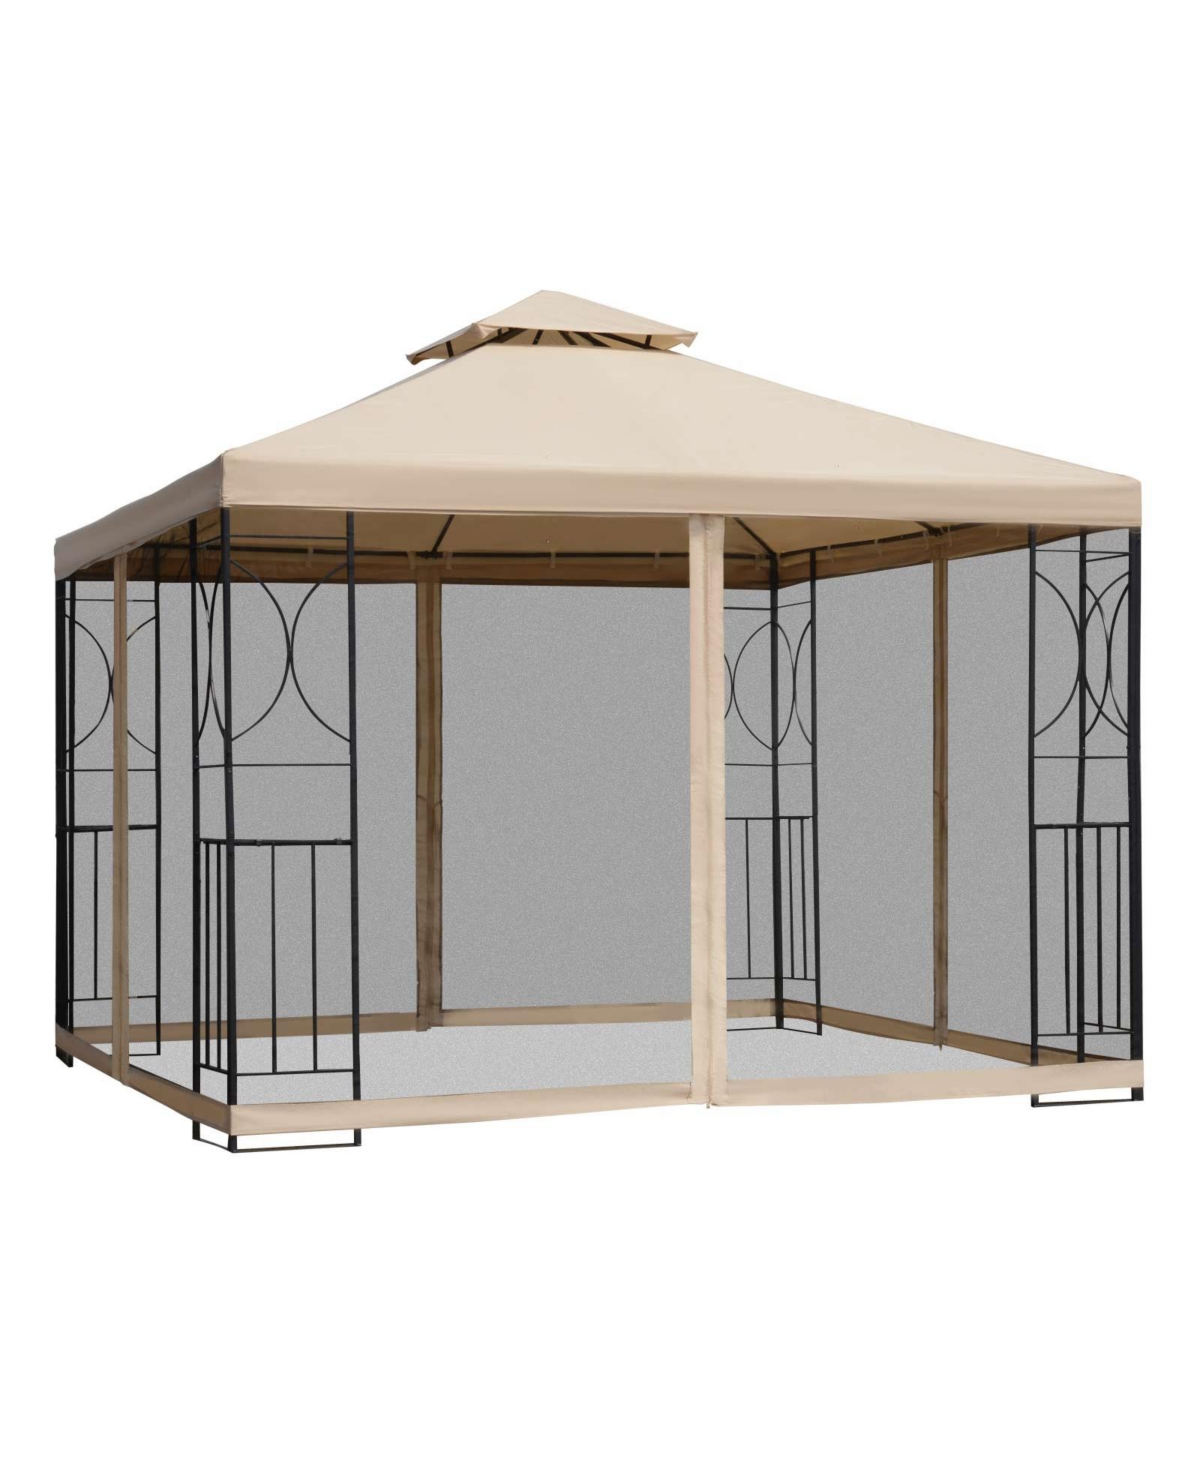 10' x 10 Steel Outdoor Patio Gazebo Canopy with Privacy Mesh Curtains, Weather-Resistant Roof, & Storage Trays - Beige/Khaki